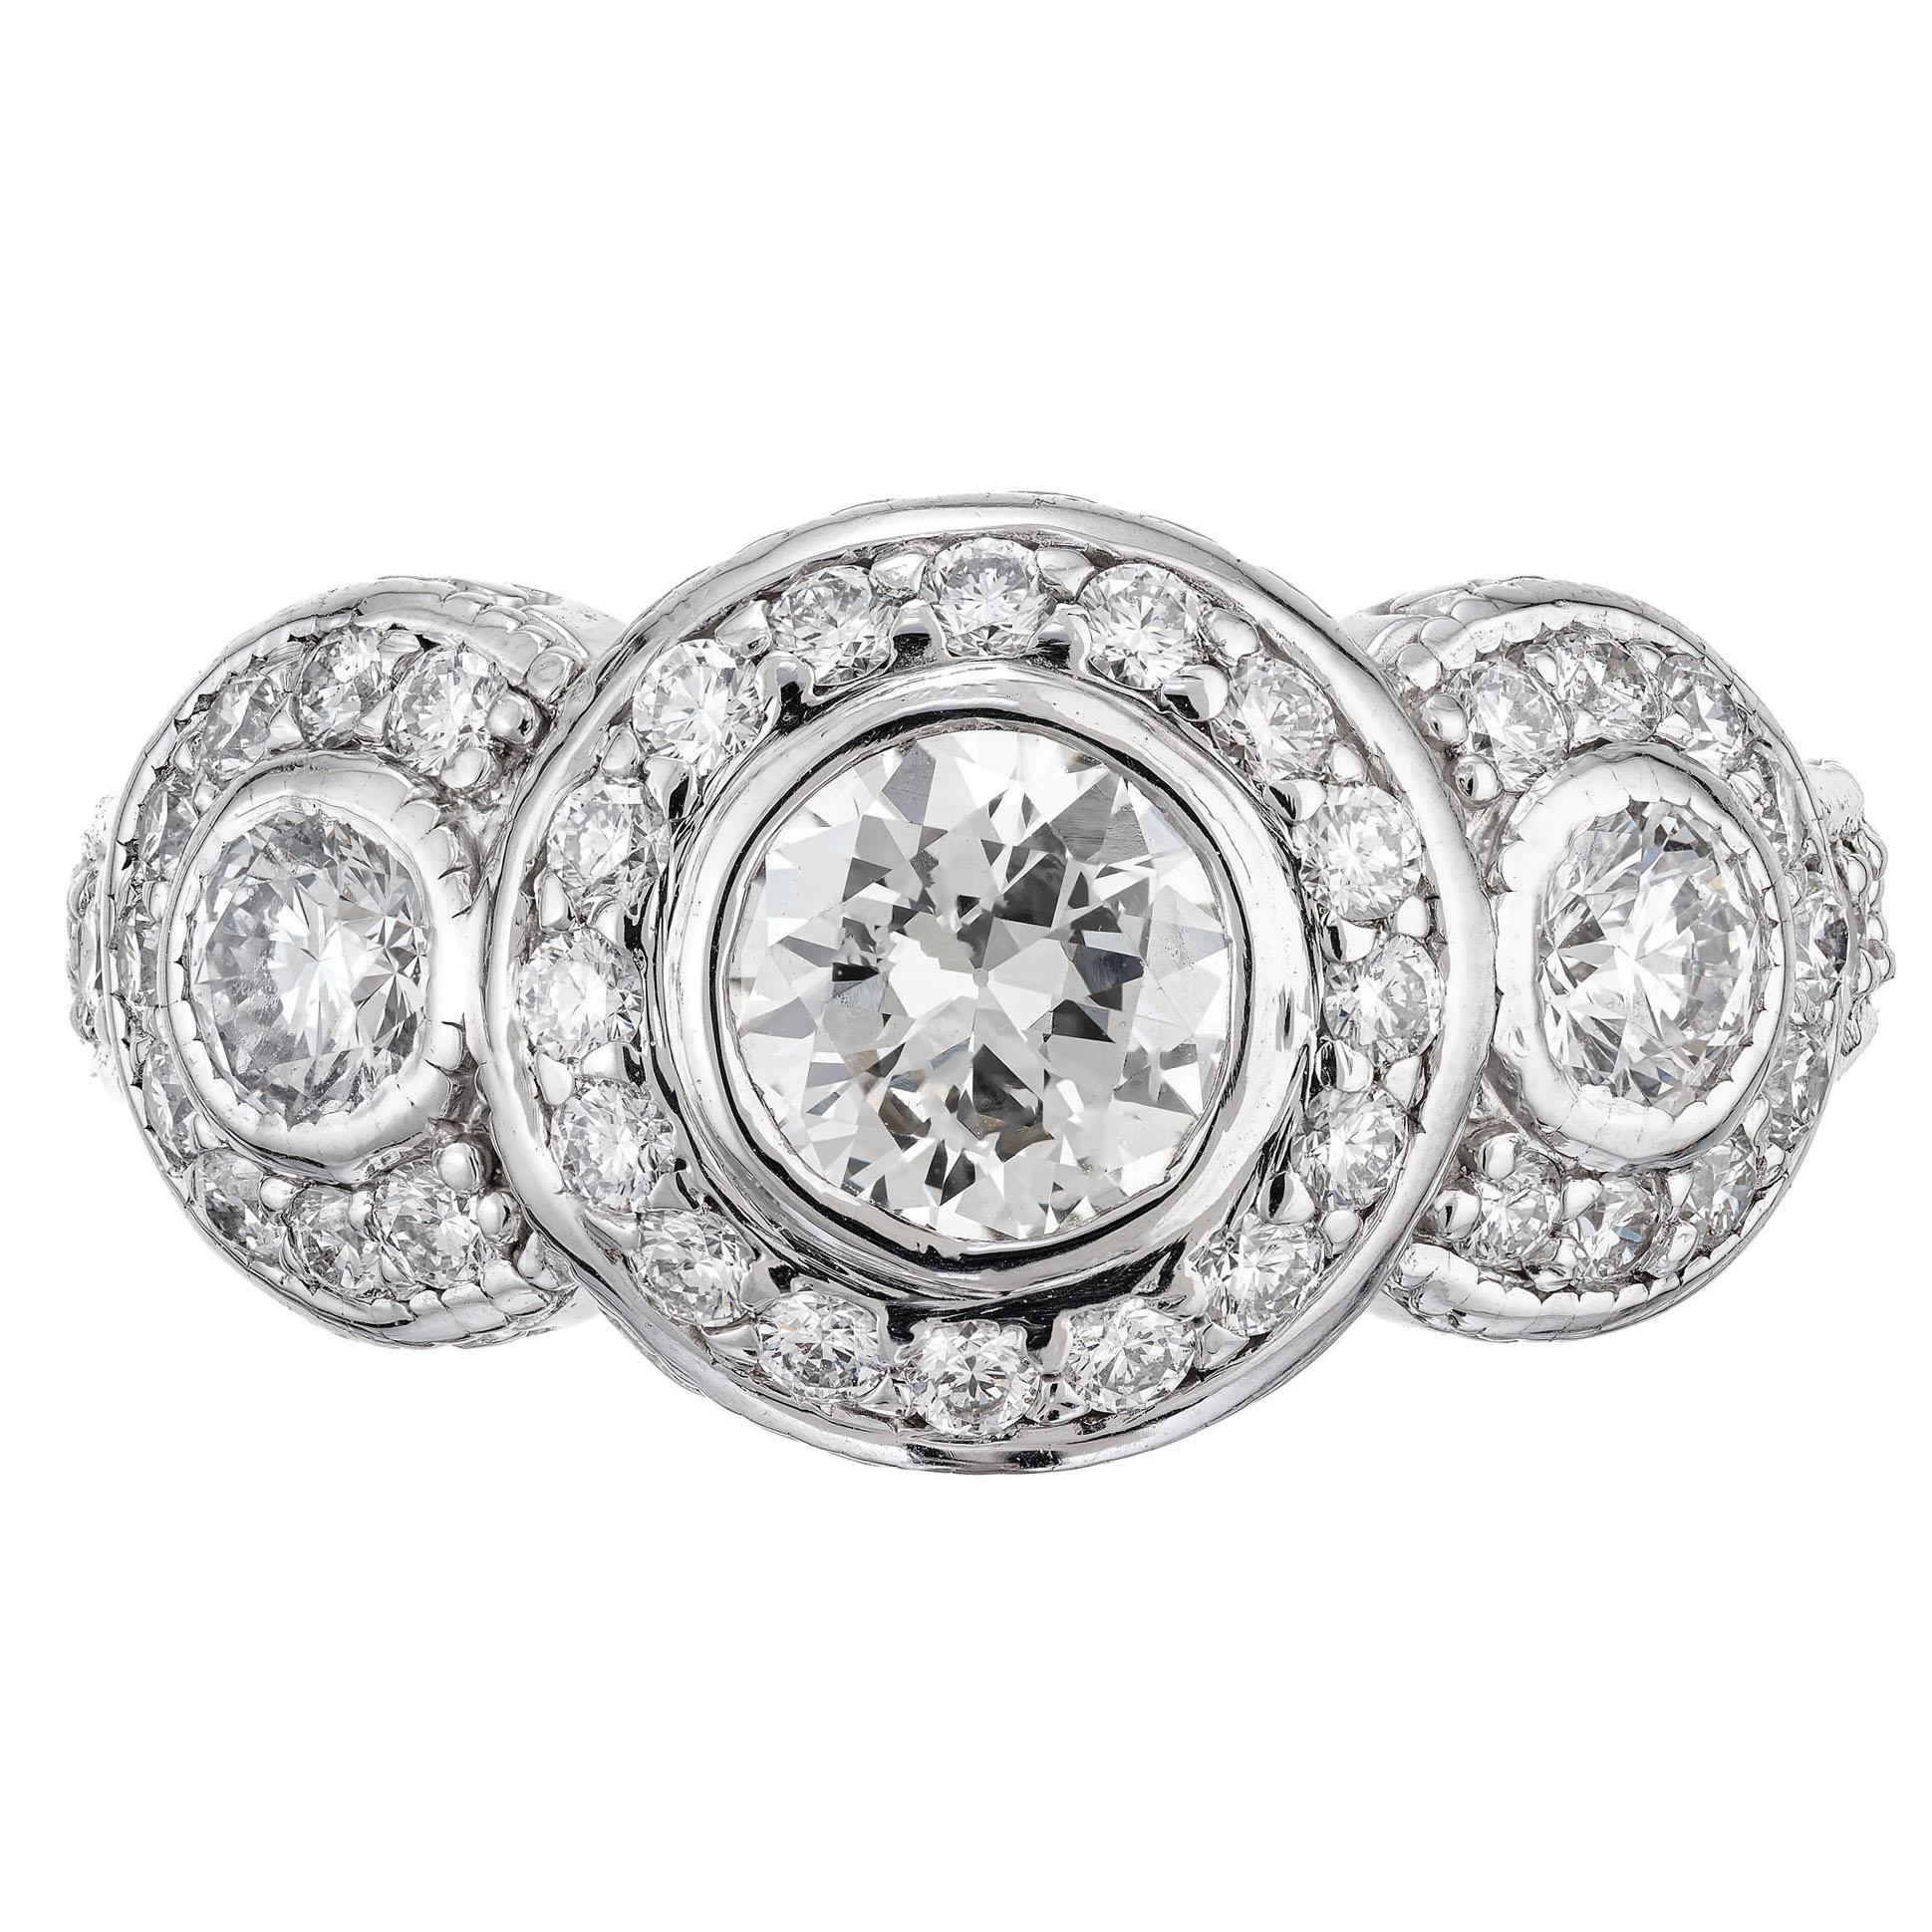 Three stone triple halo diamond ring with engraved sides and shoulders. The center diamond is GIA certified. Set in 14k white gold three stone setting with halos around each diamond, accented with round diamonds along the shank.  

1 round brilliant